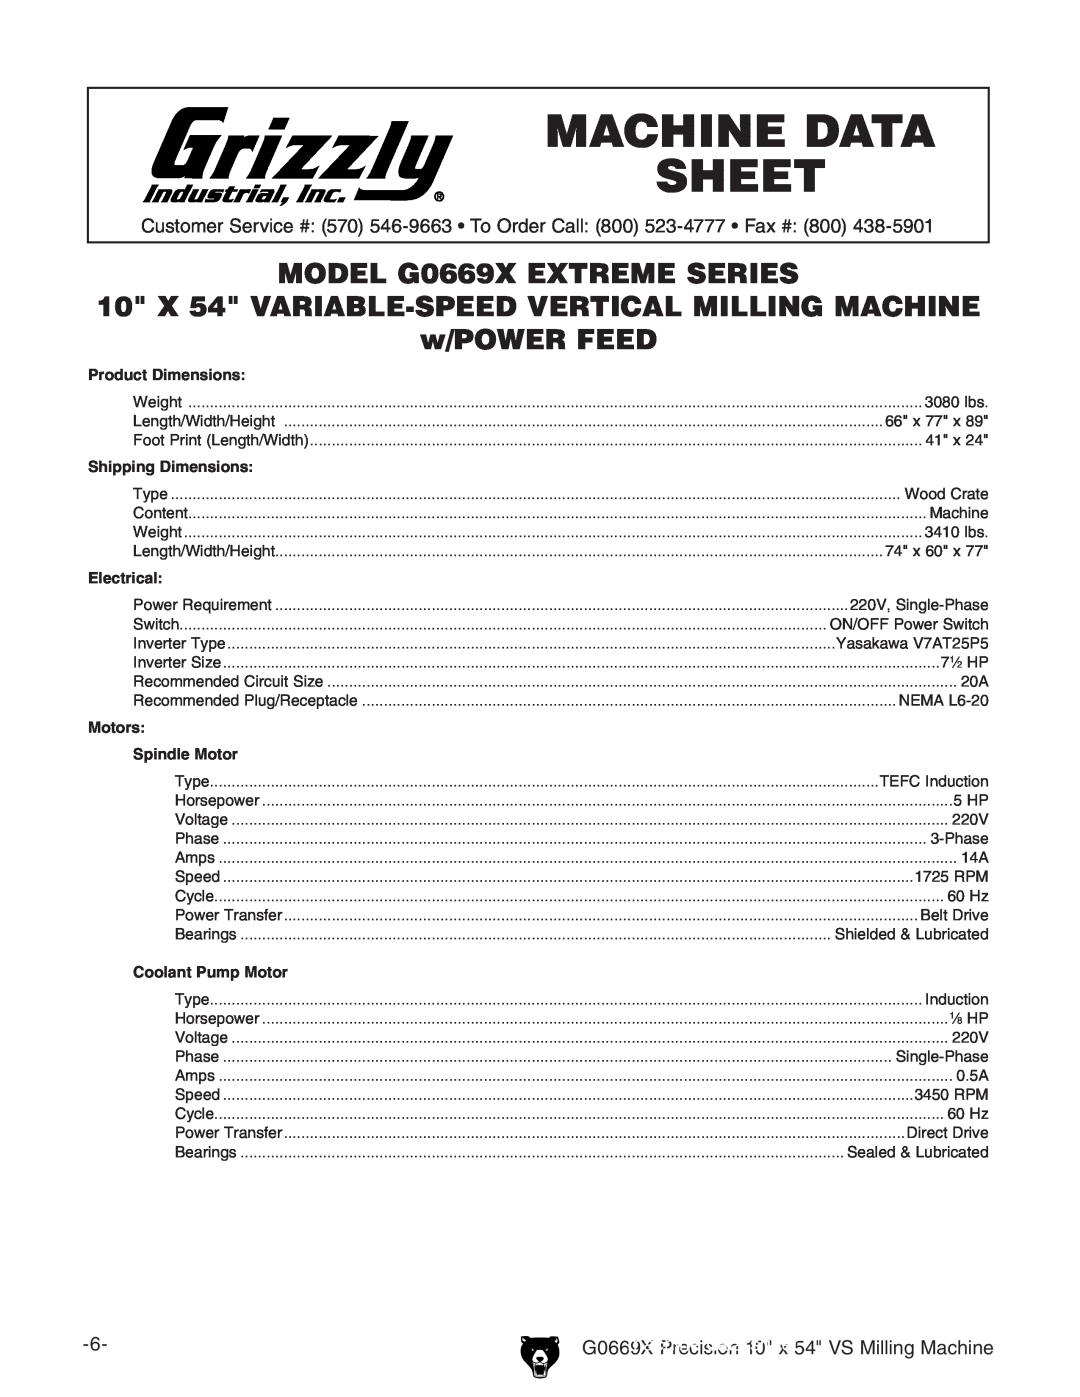 Grizzly g0669X Machine Data Sheet, machine data sheet, MODEL G0669X EXTREME SERIES, Product Dimensions, Electrical 